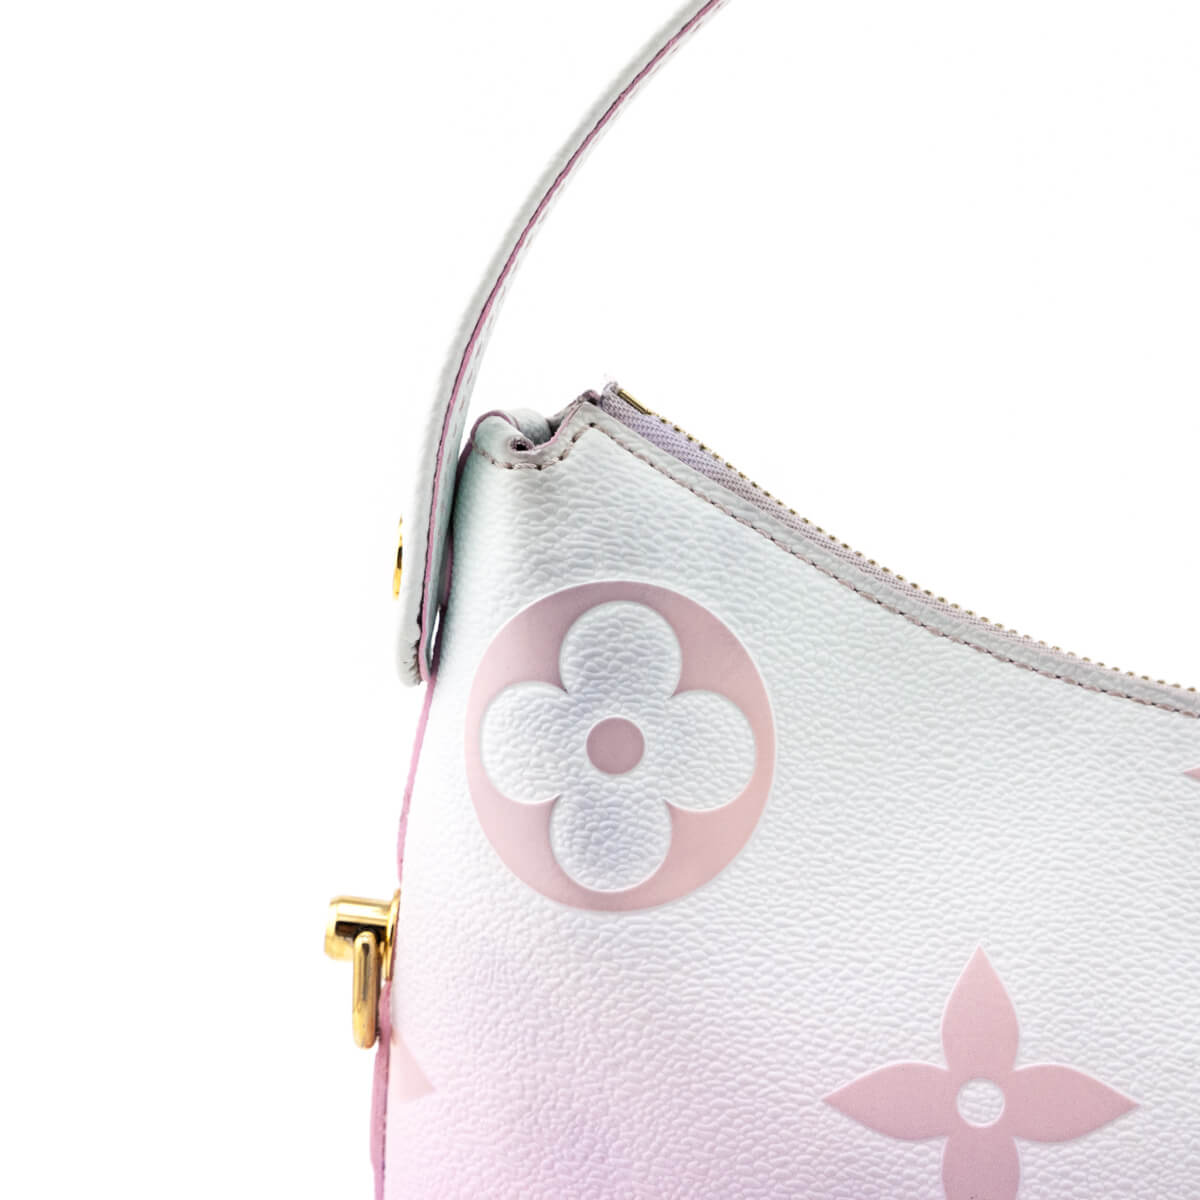 Louis Vuitton Sunrise Pastel Monogram Giant Spring in the City Marshmallow Hobo PM - Love that Bag etc - Preowned Authentic Designer Handbags & Preloved Fashions